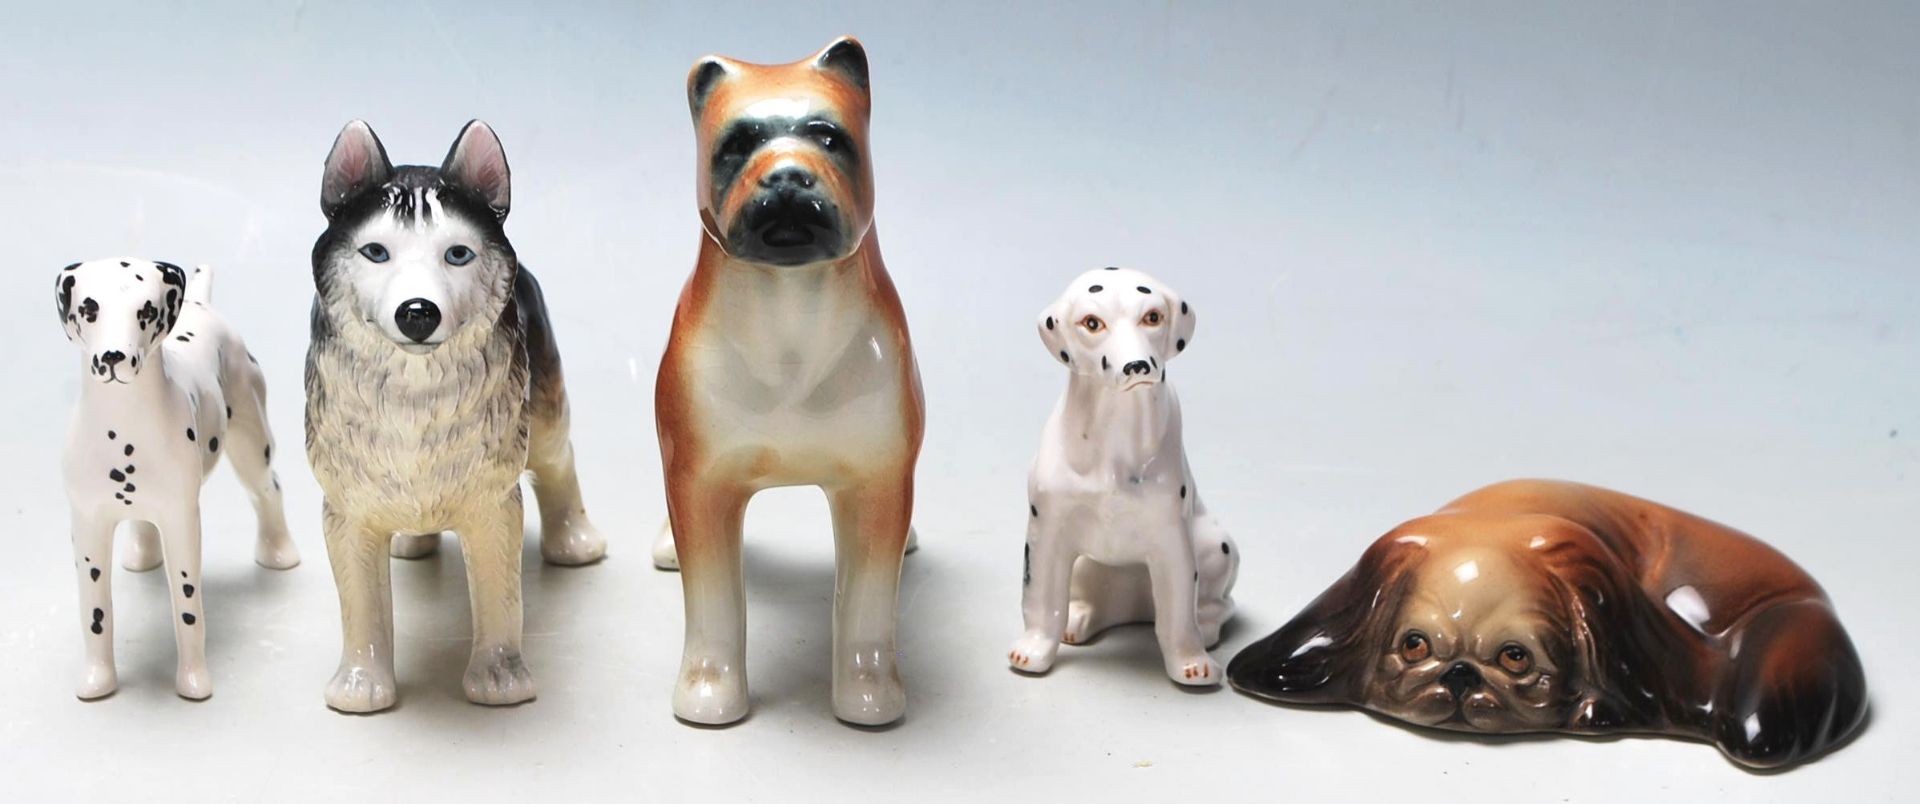 A collection of 20th Century ceramic figurines of dogs in various shapes and sizes to include a